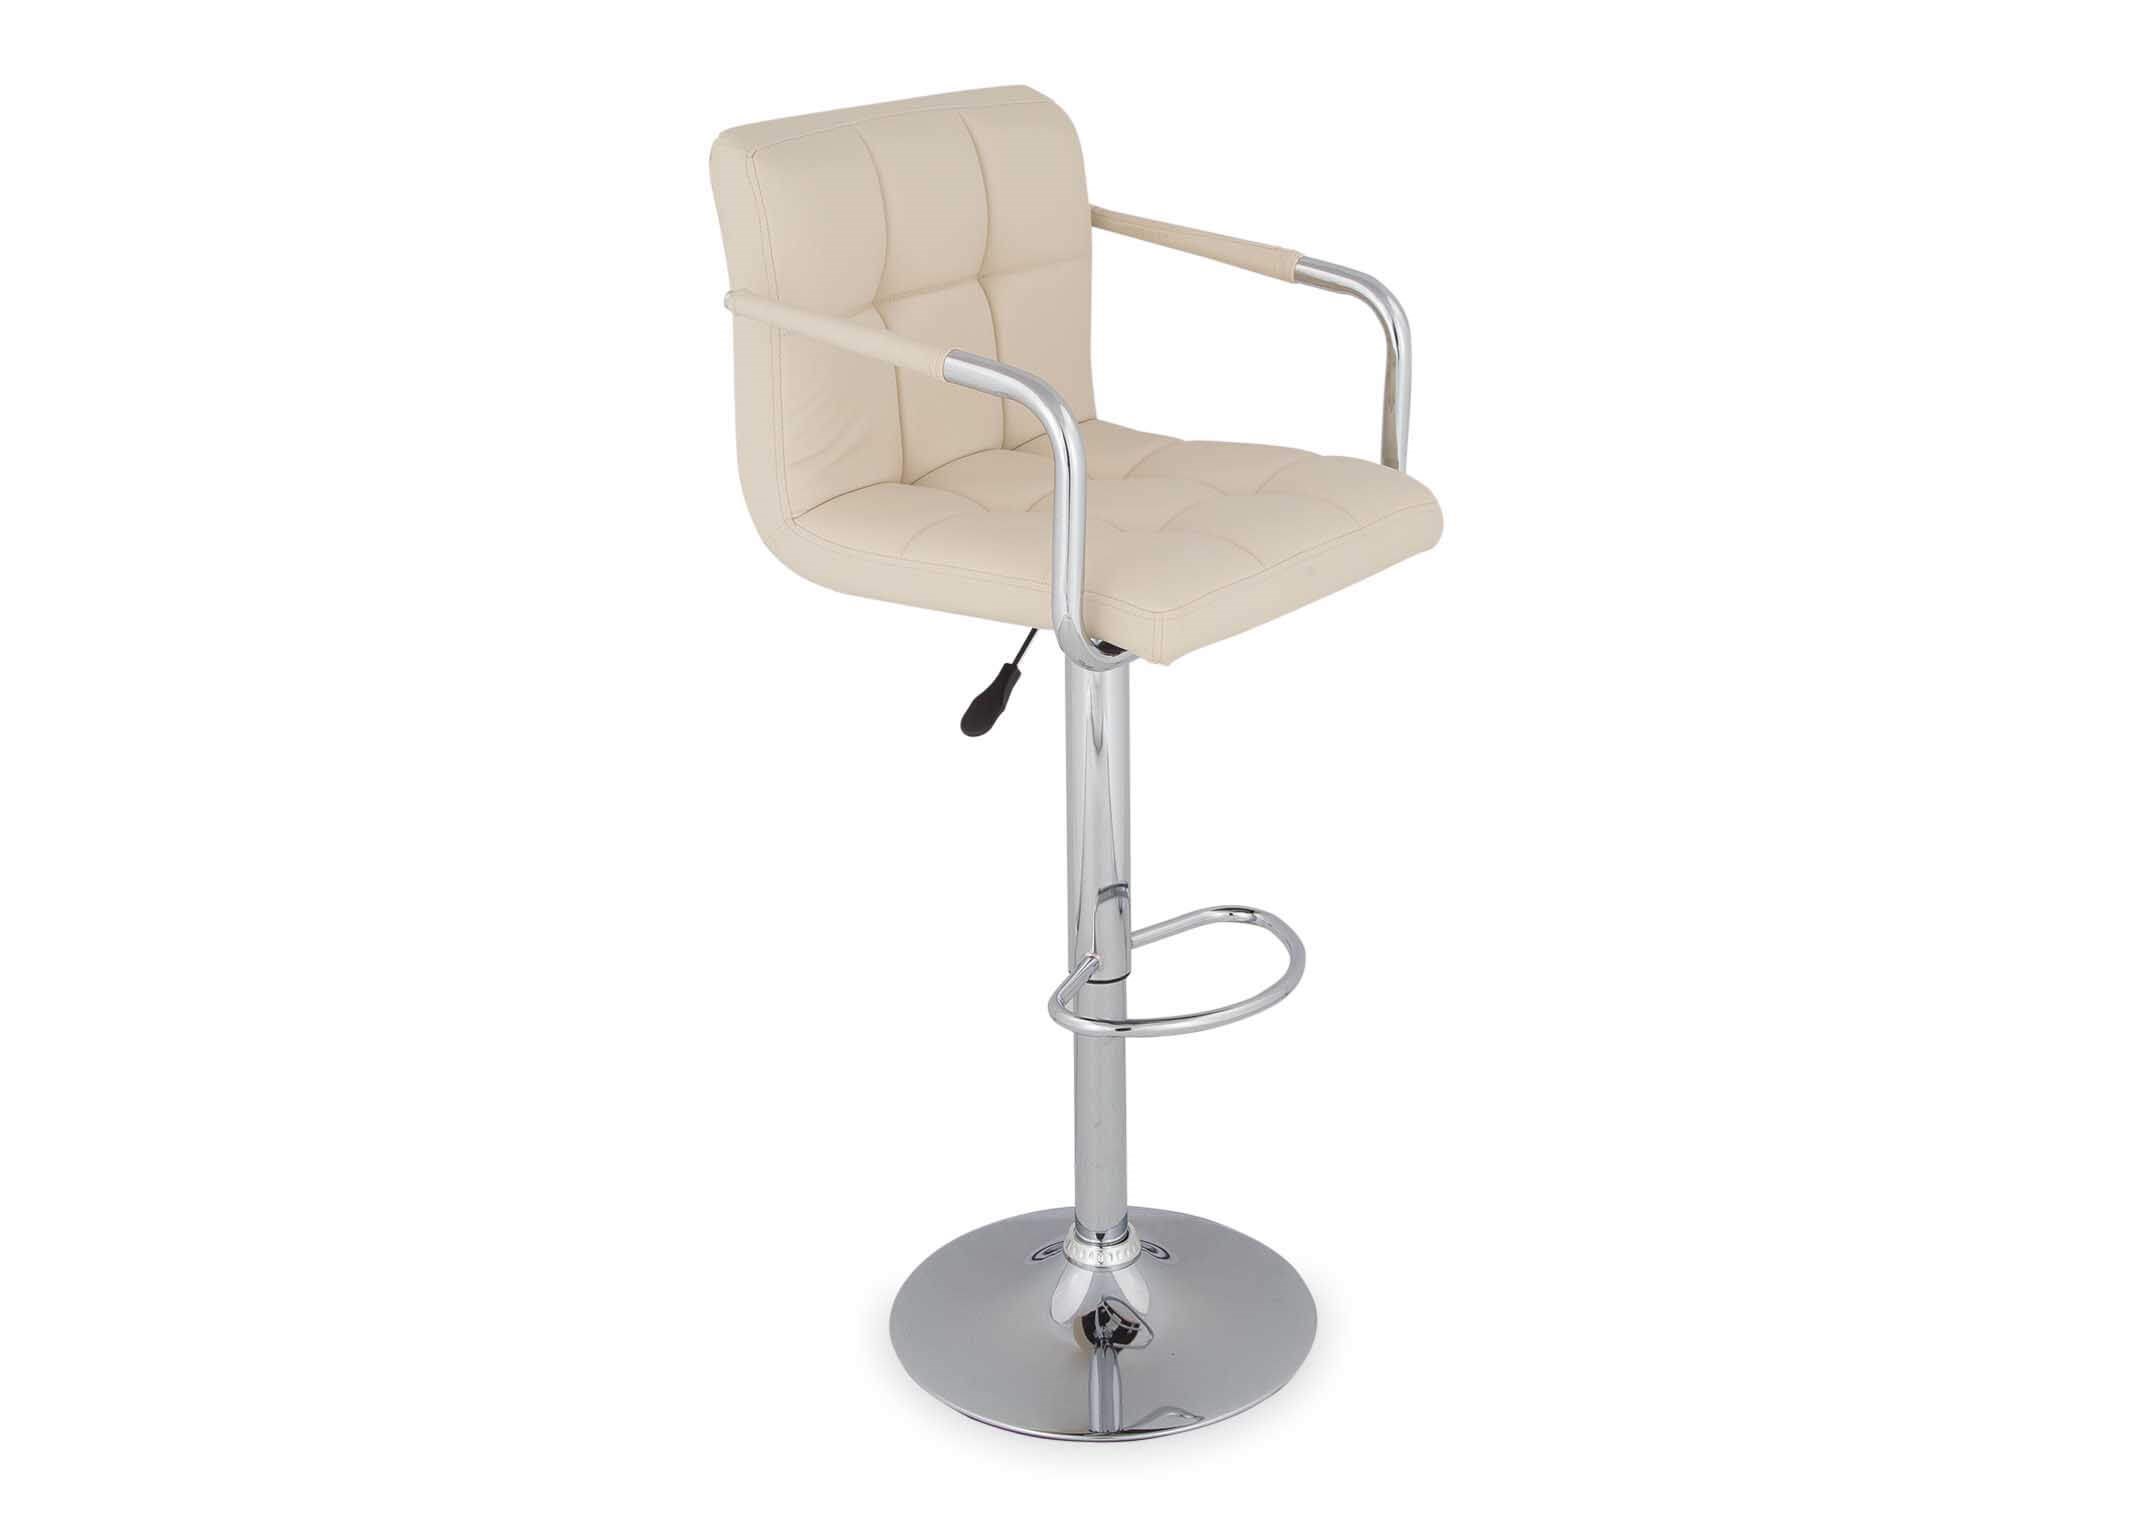 Cream Faux Leather Bar Stool Jasmine, Faux Leather Bar Stools With Arms